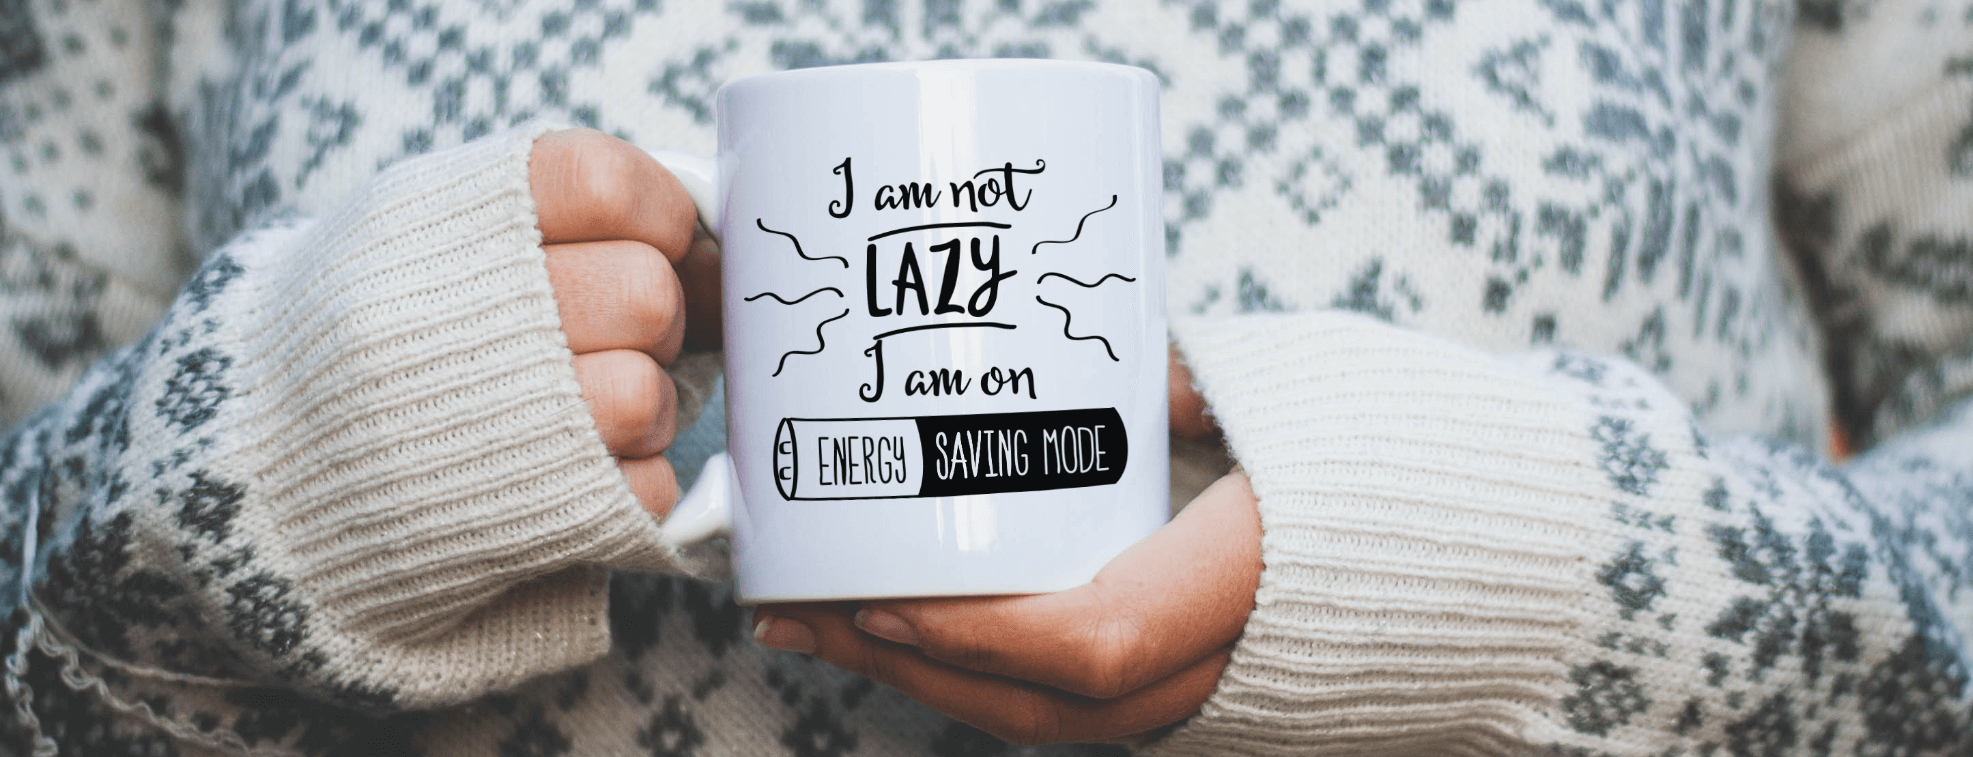 A girl in a cozy sweater holding a mug with 'I am not lazy I am on energy saving mode' written on it